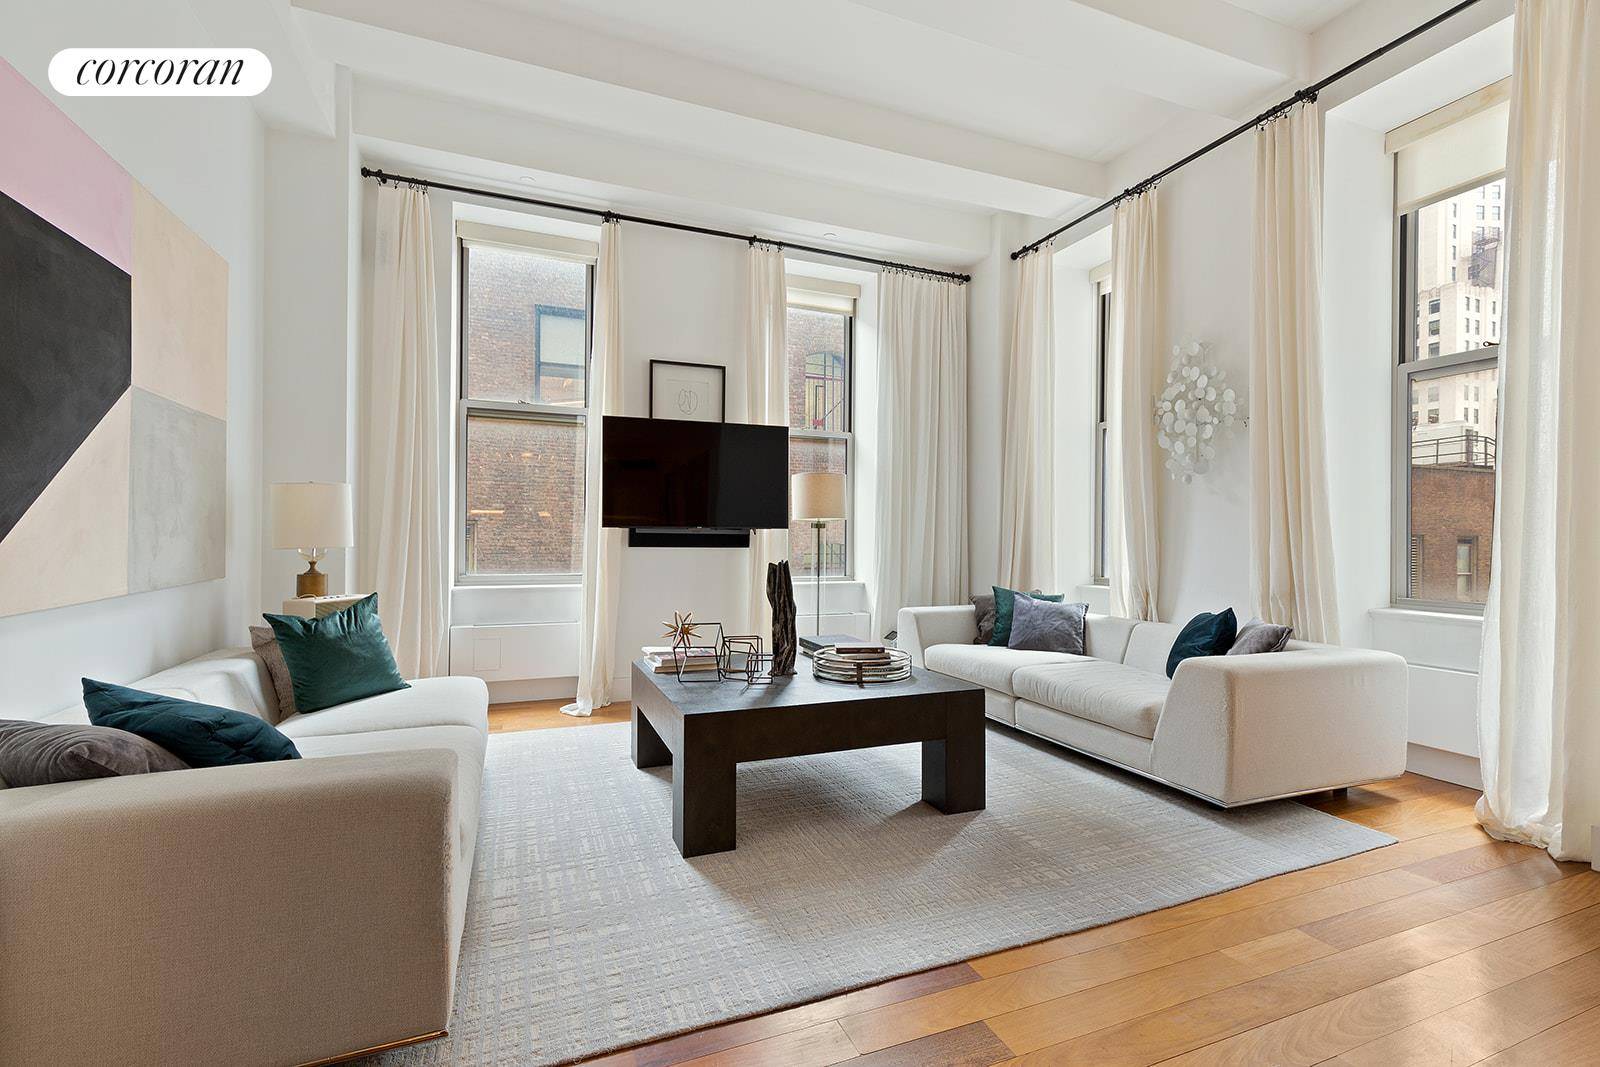 Loft Living on Madison Square Park at its finest.